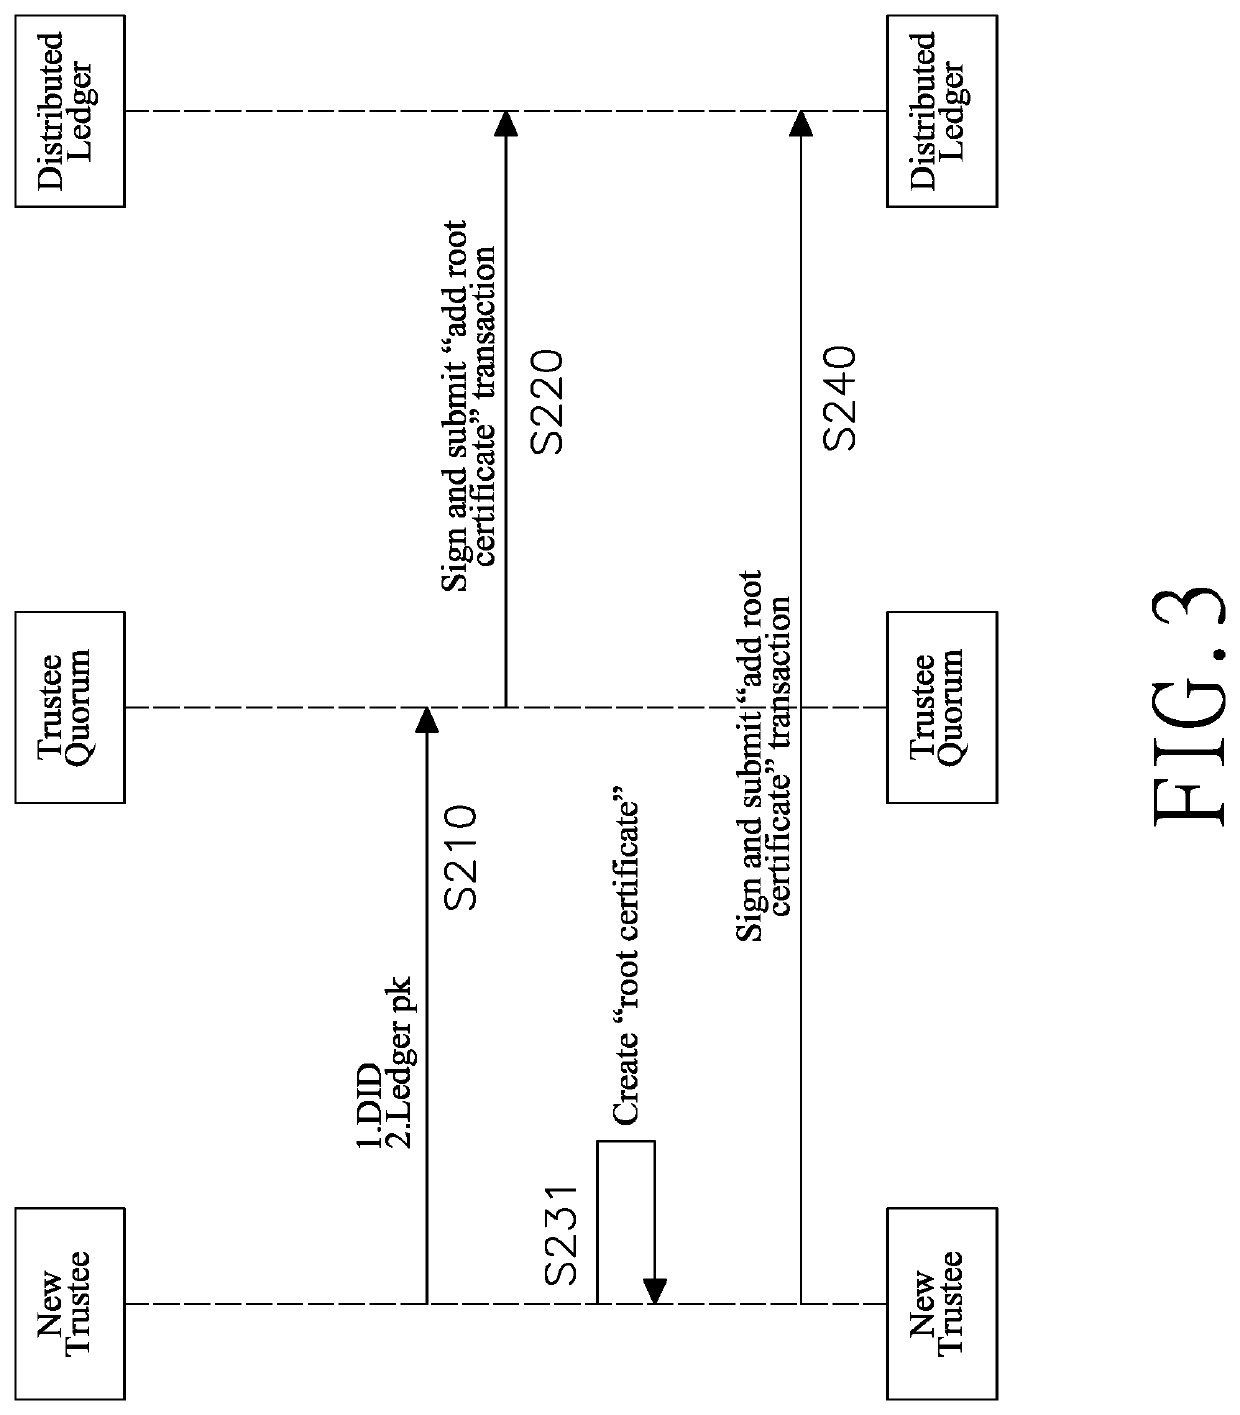 Distributed ledger-based methods and systems for certificate authentication